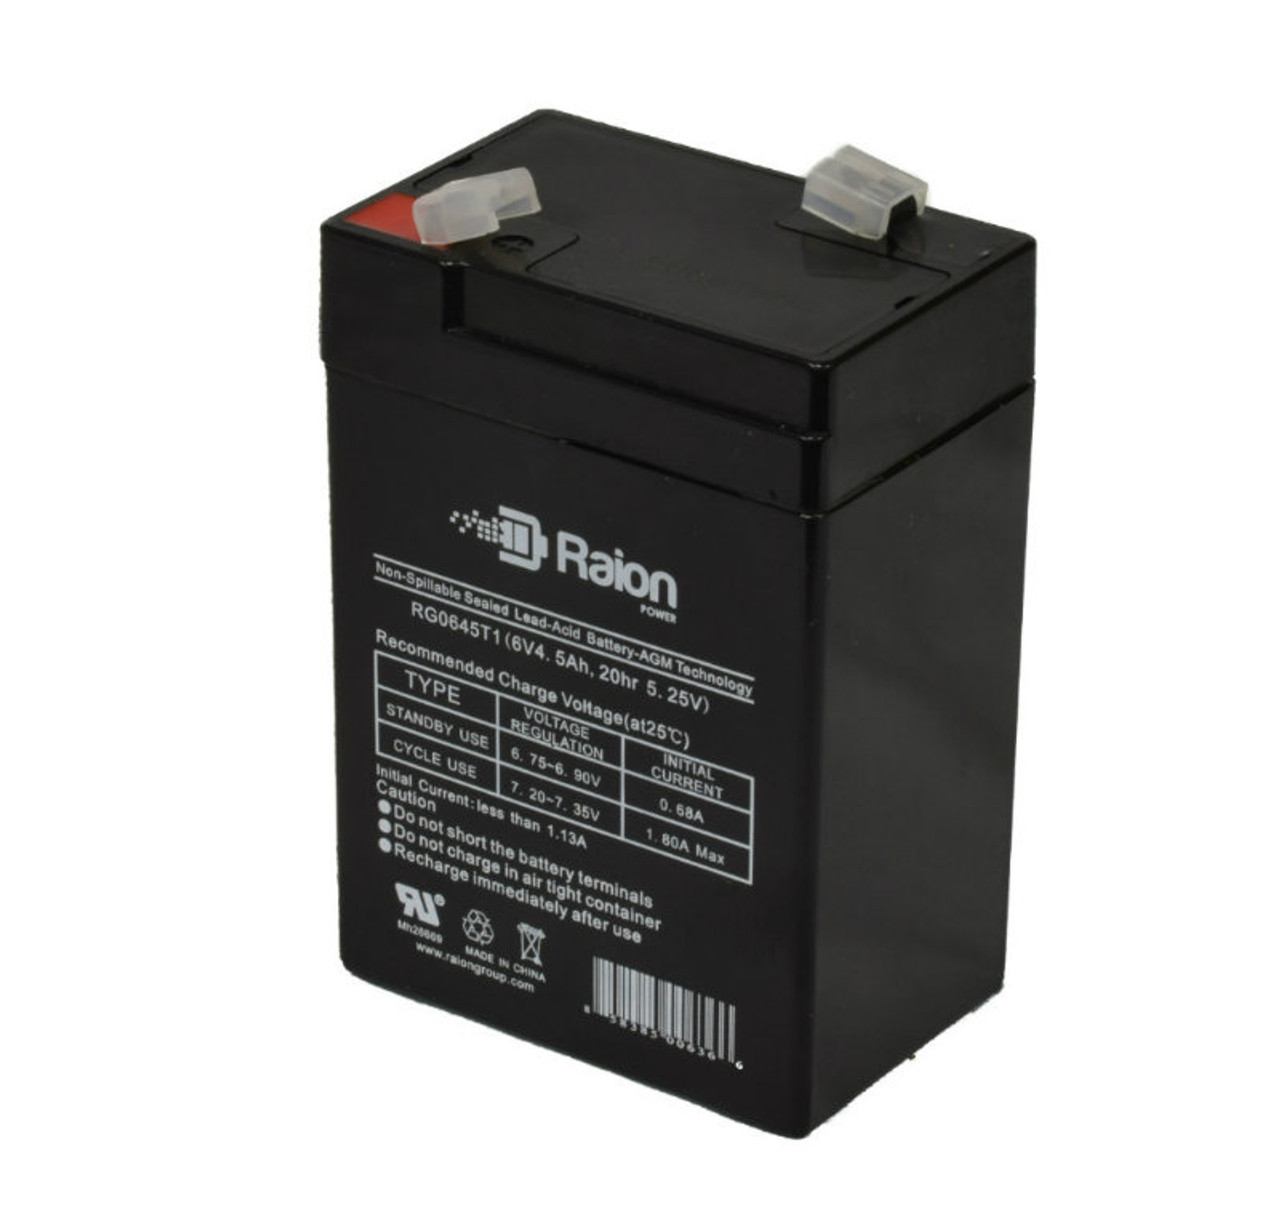 Raion Power RG0645T1 6V 4.5Ah Replacement Battery Cartridge for Weiboer GB6-4.5